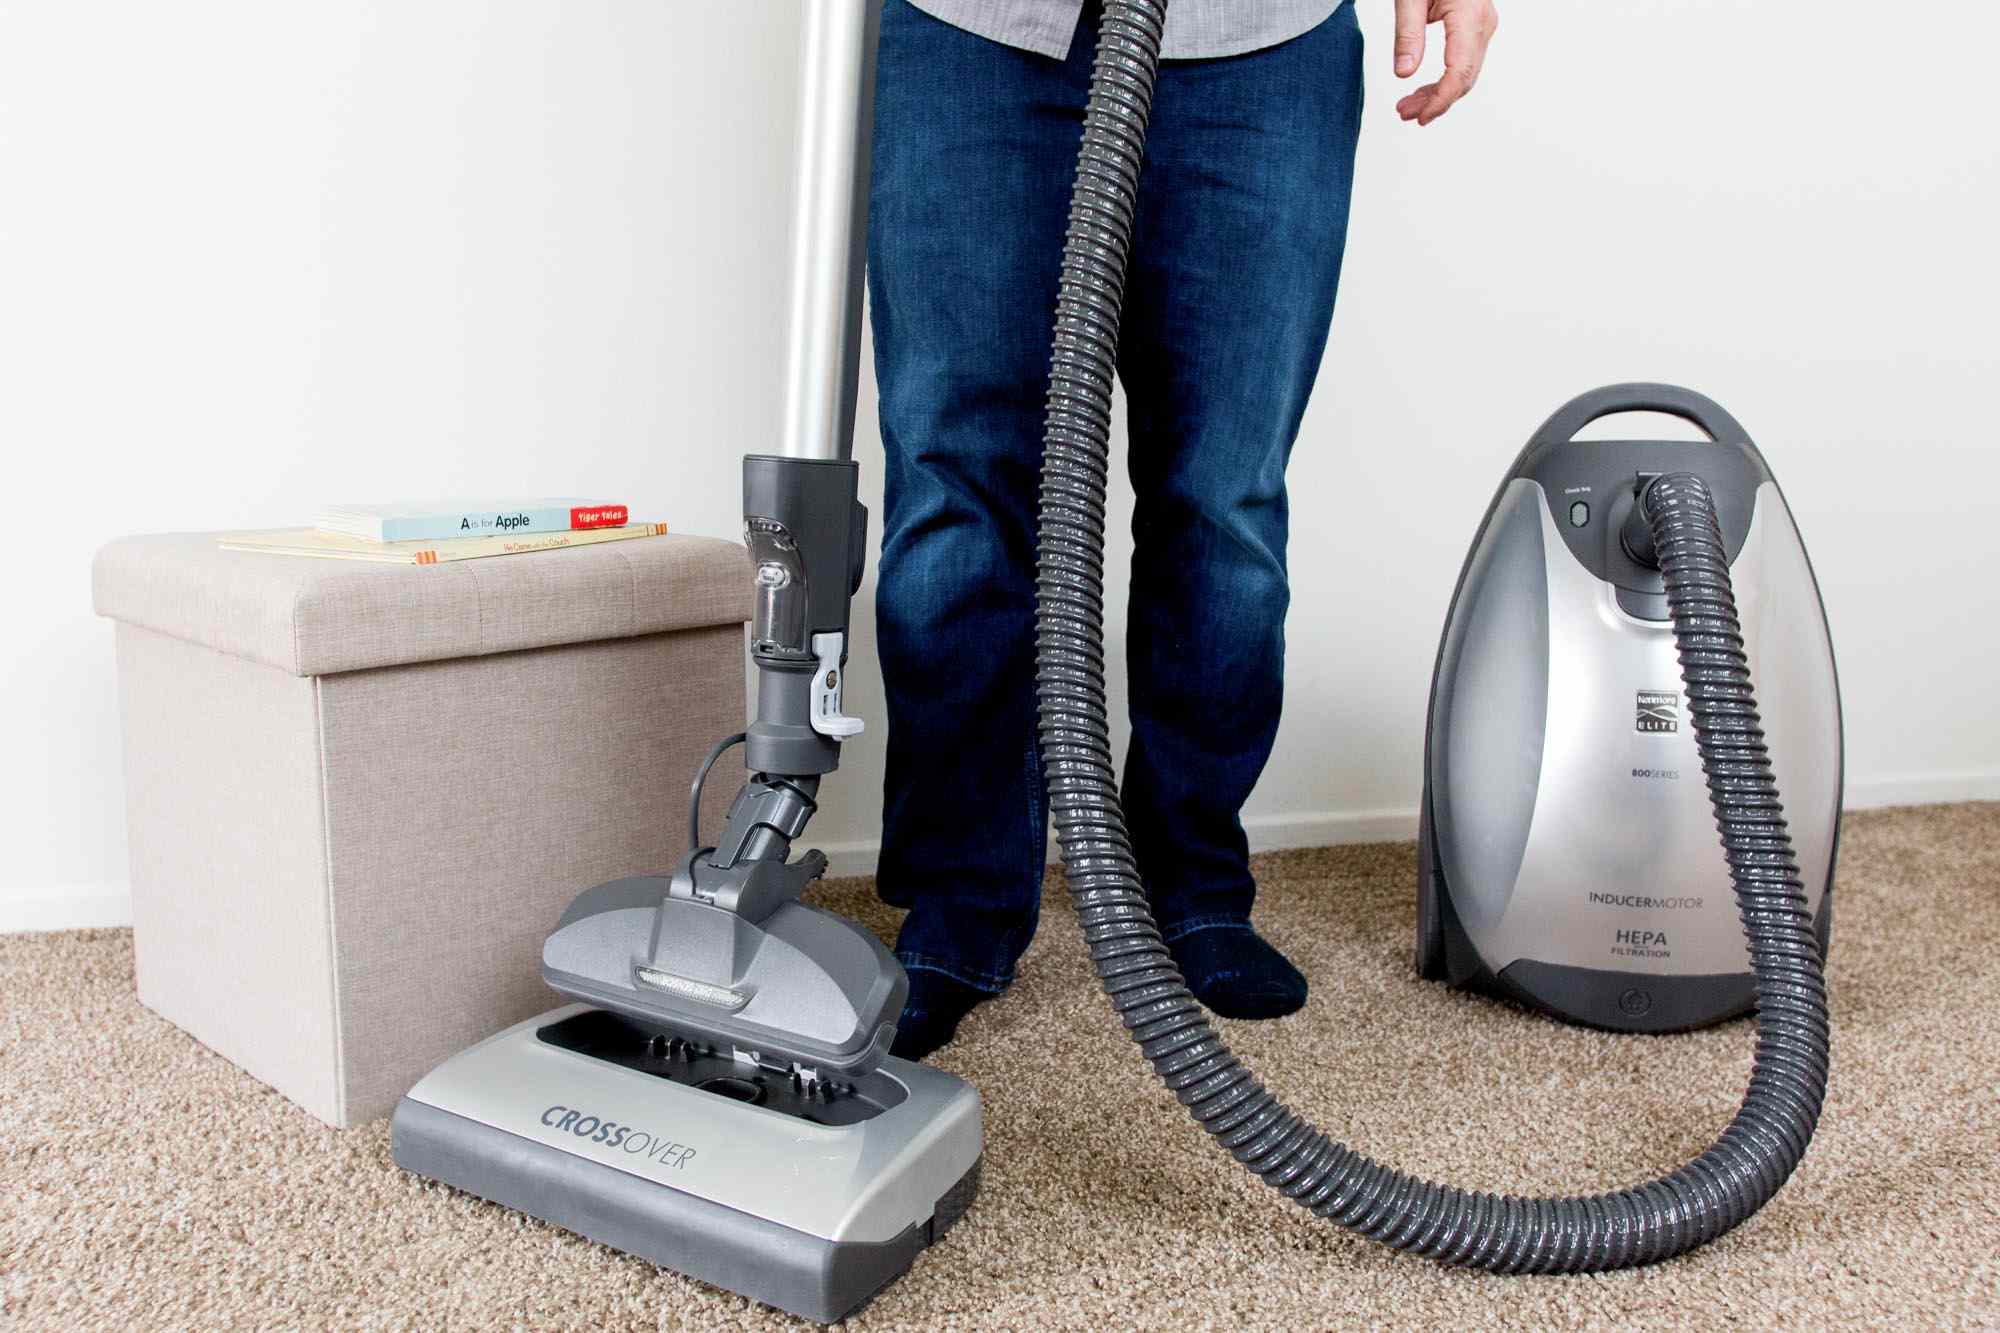 Canister vacuum cleaners. Samsung Canister Vacuum Cleaner. Atmos Vacuum Canister. Елекстро Vakuum 525125. Kenmore Elite Vacuum Review.